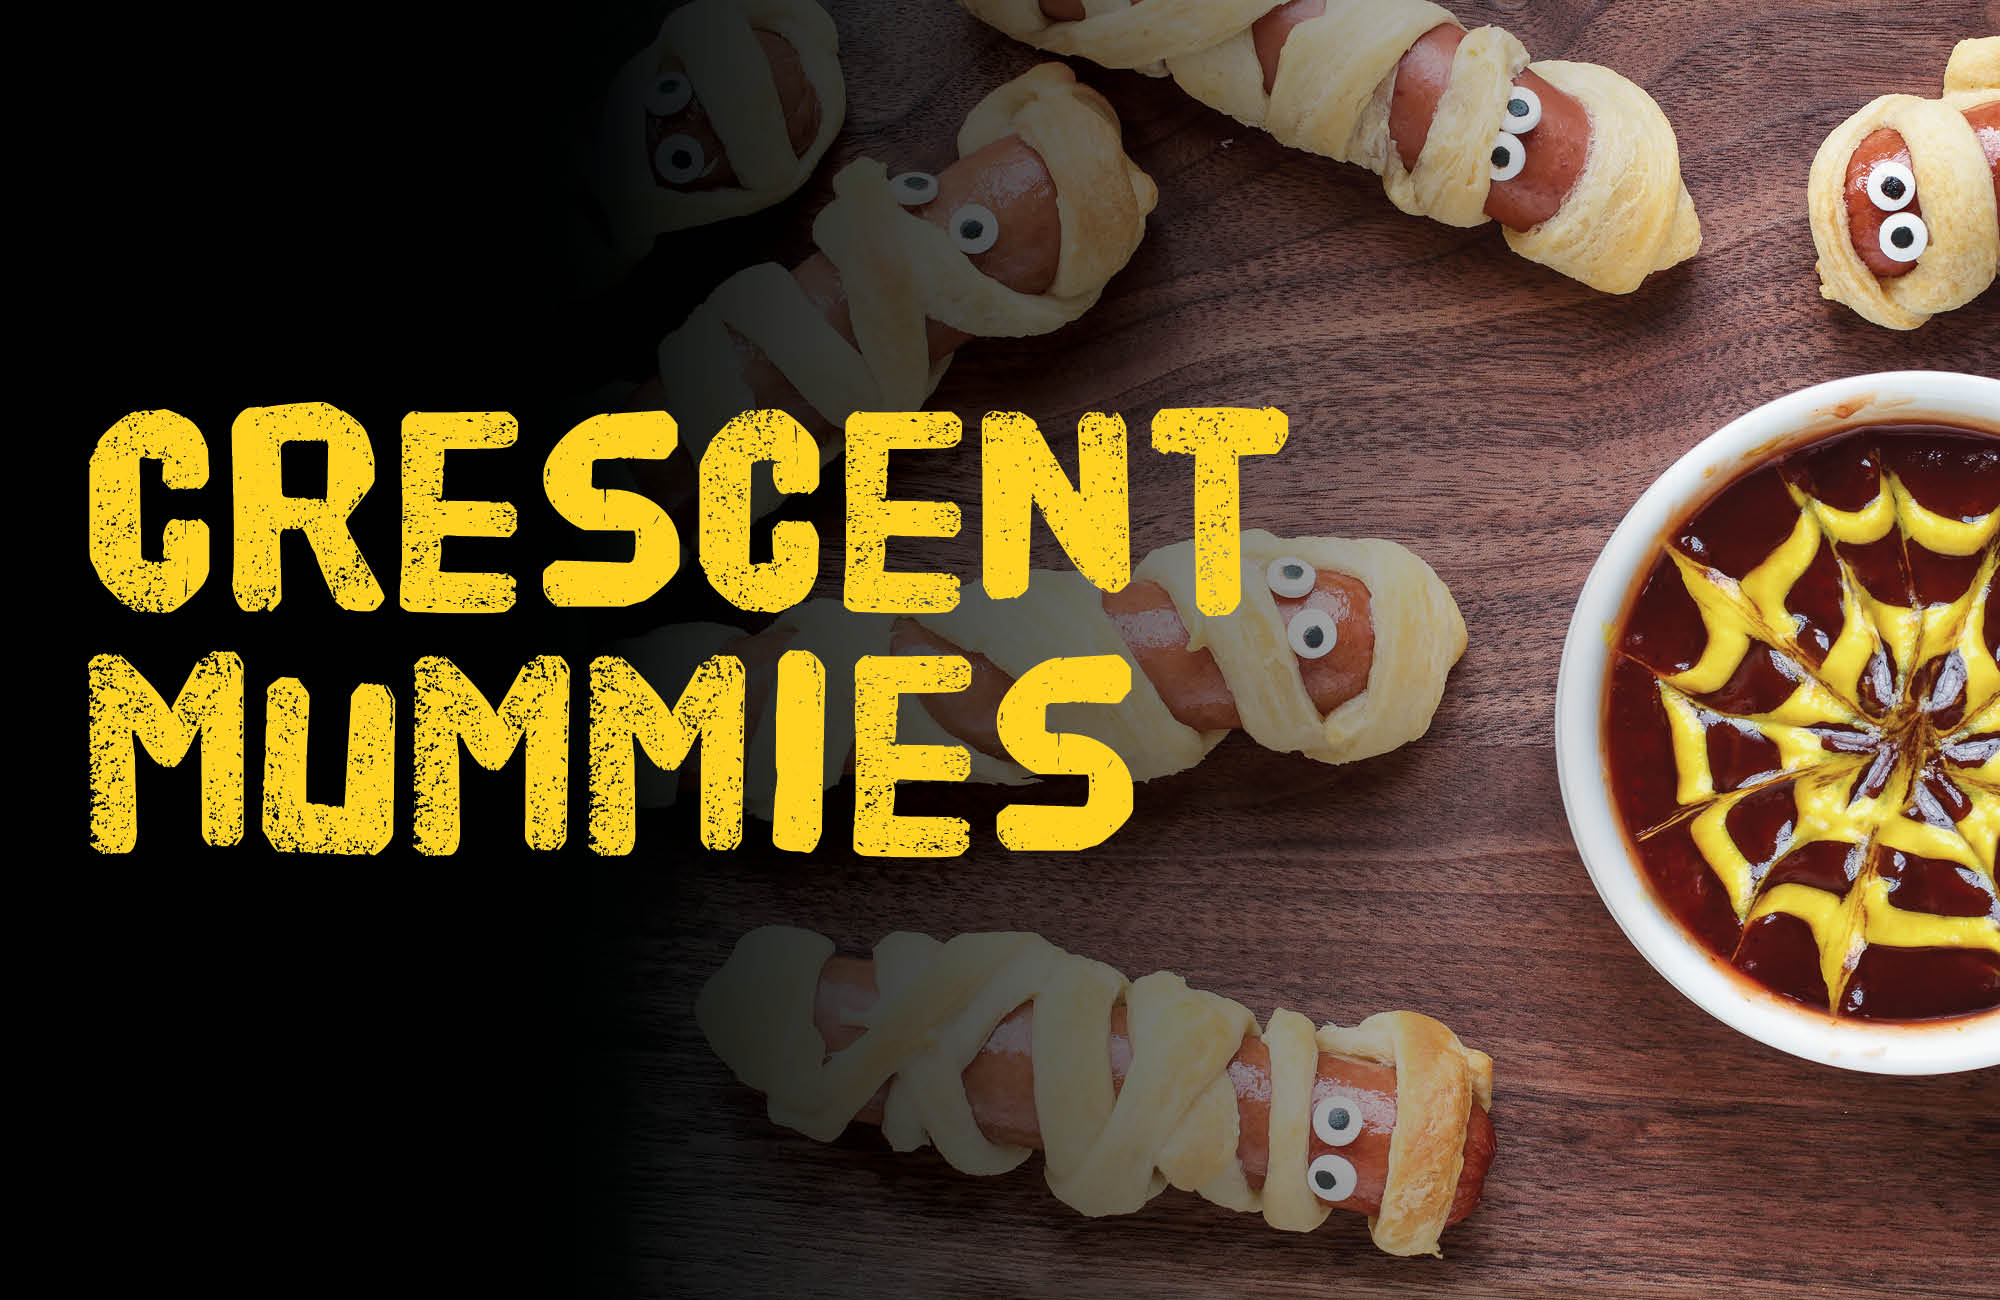 This Halloween, Wrap Up these Yummy Crescent Mummy Dogs